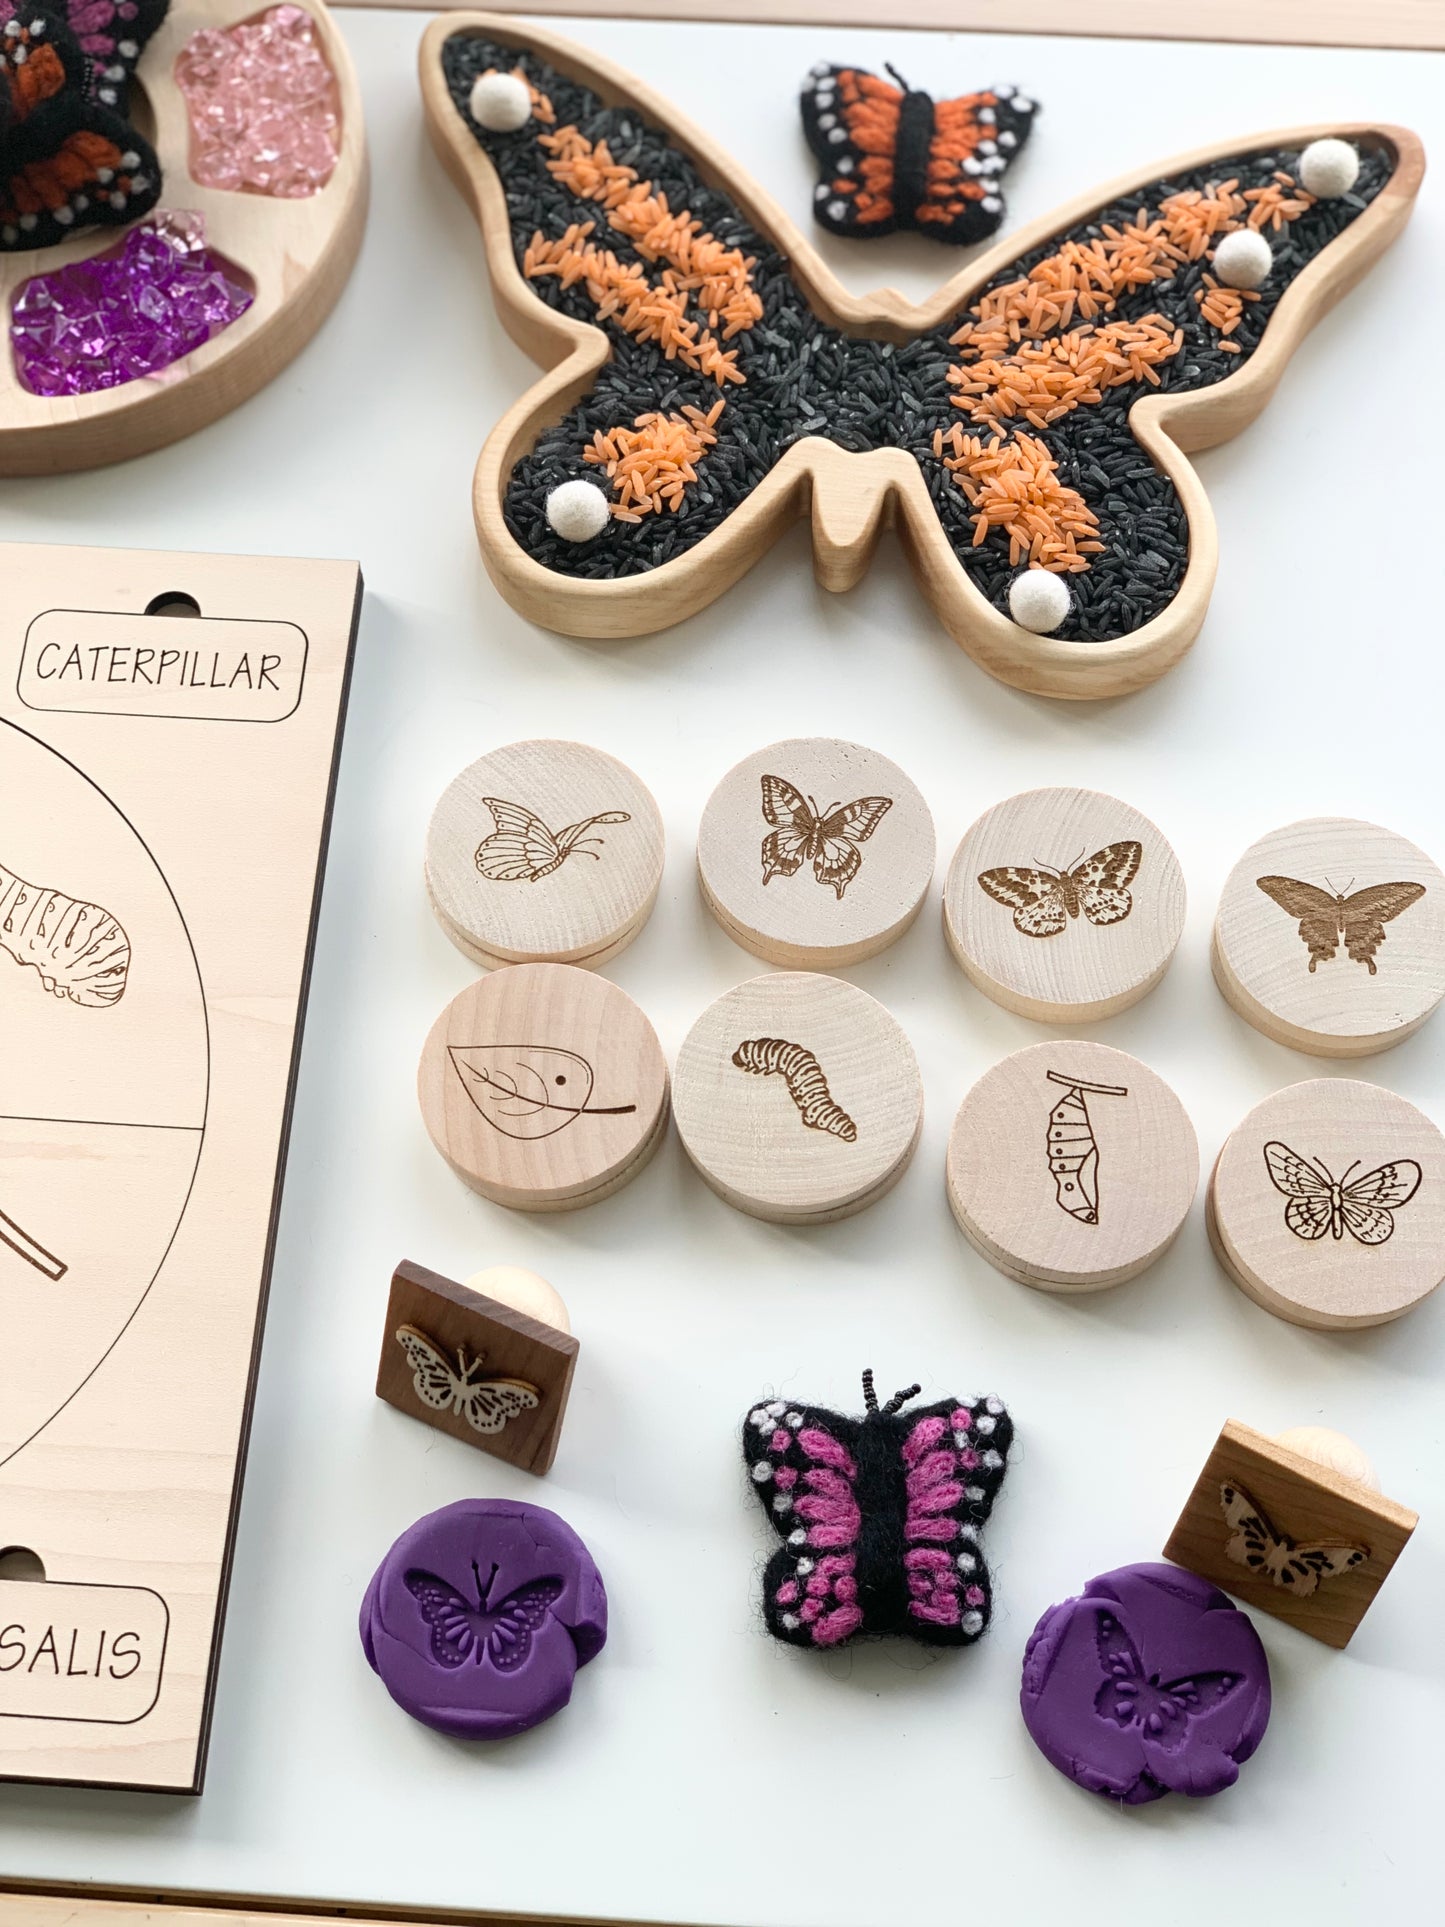 Butterfly Life Cycle Memory Game